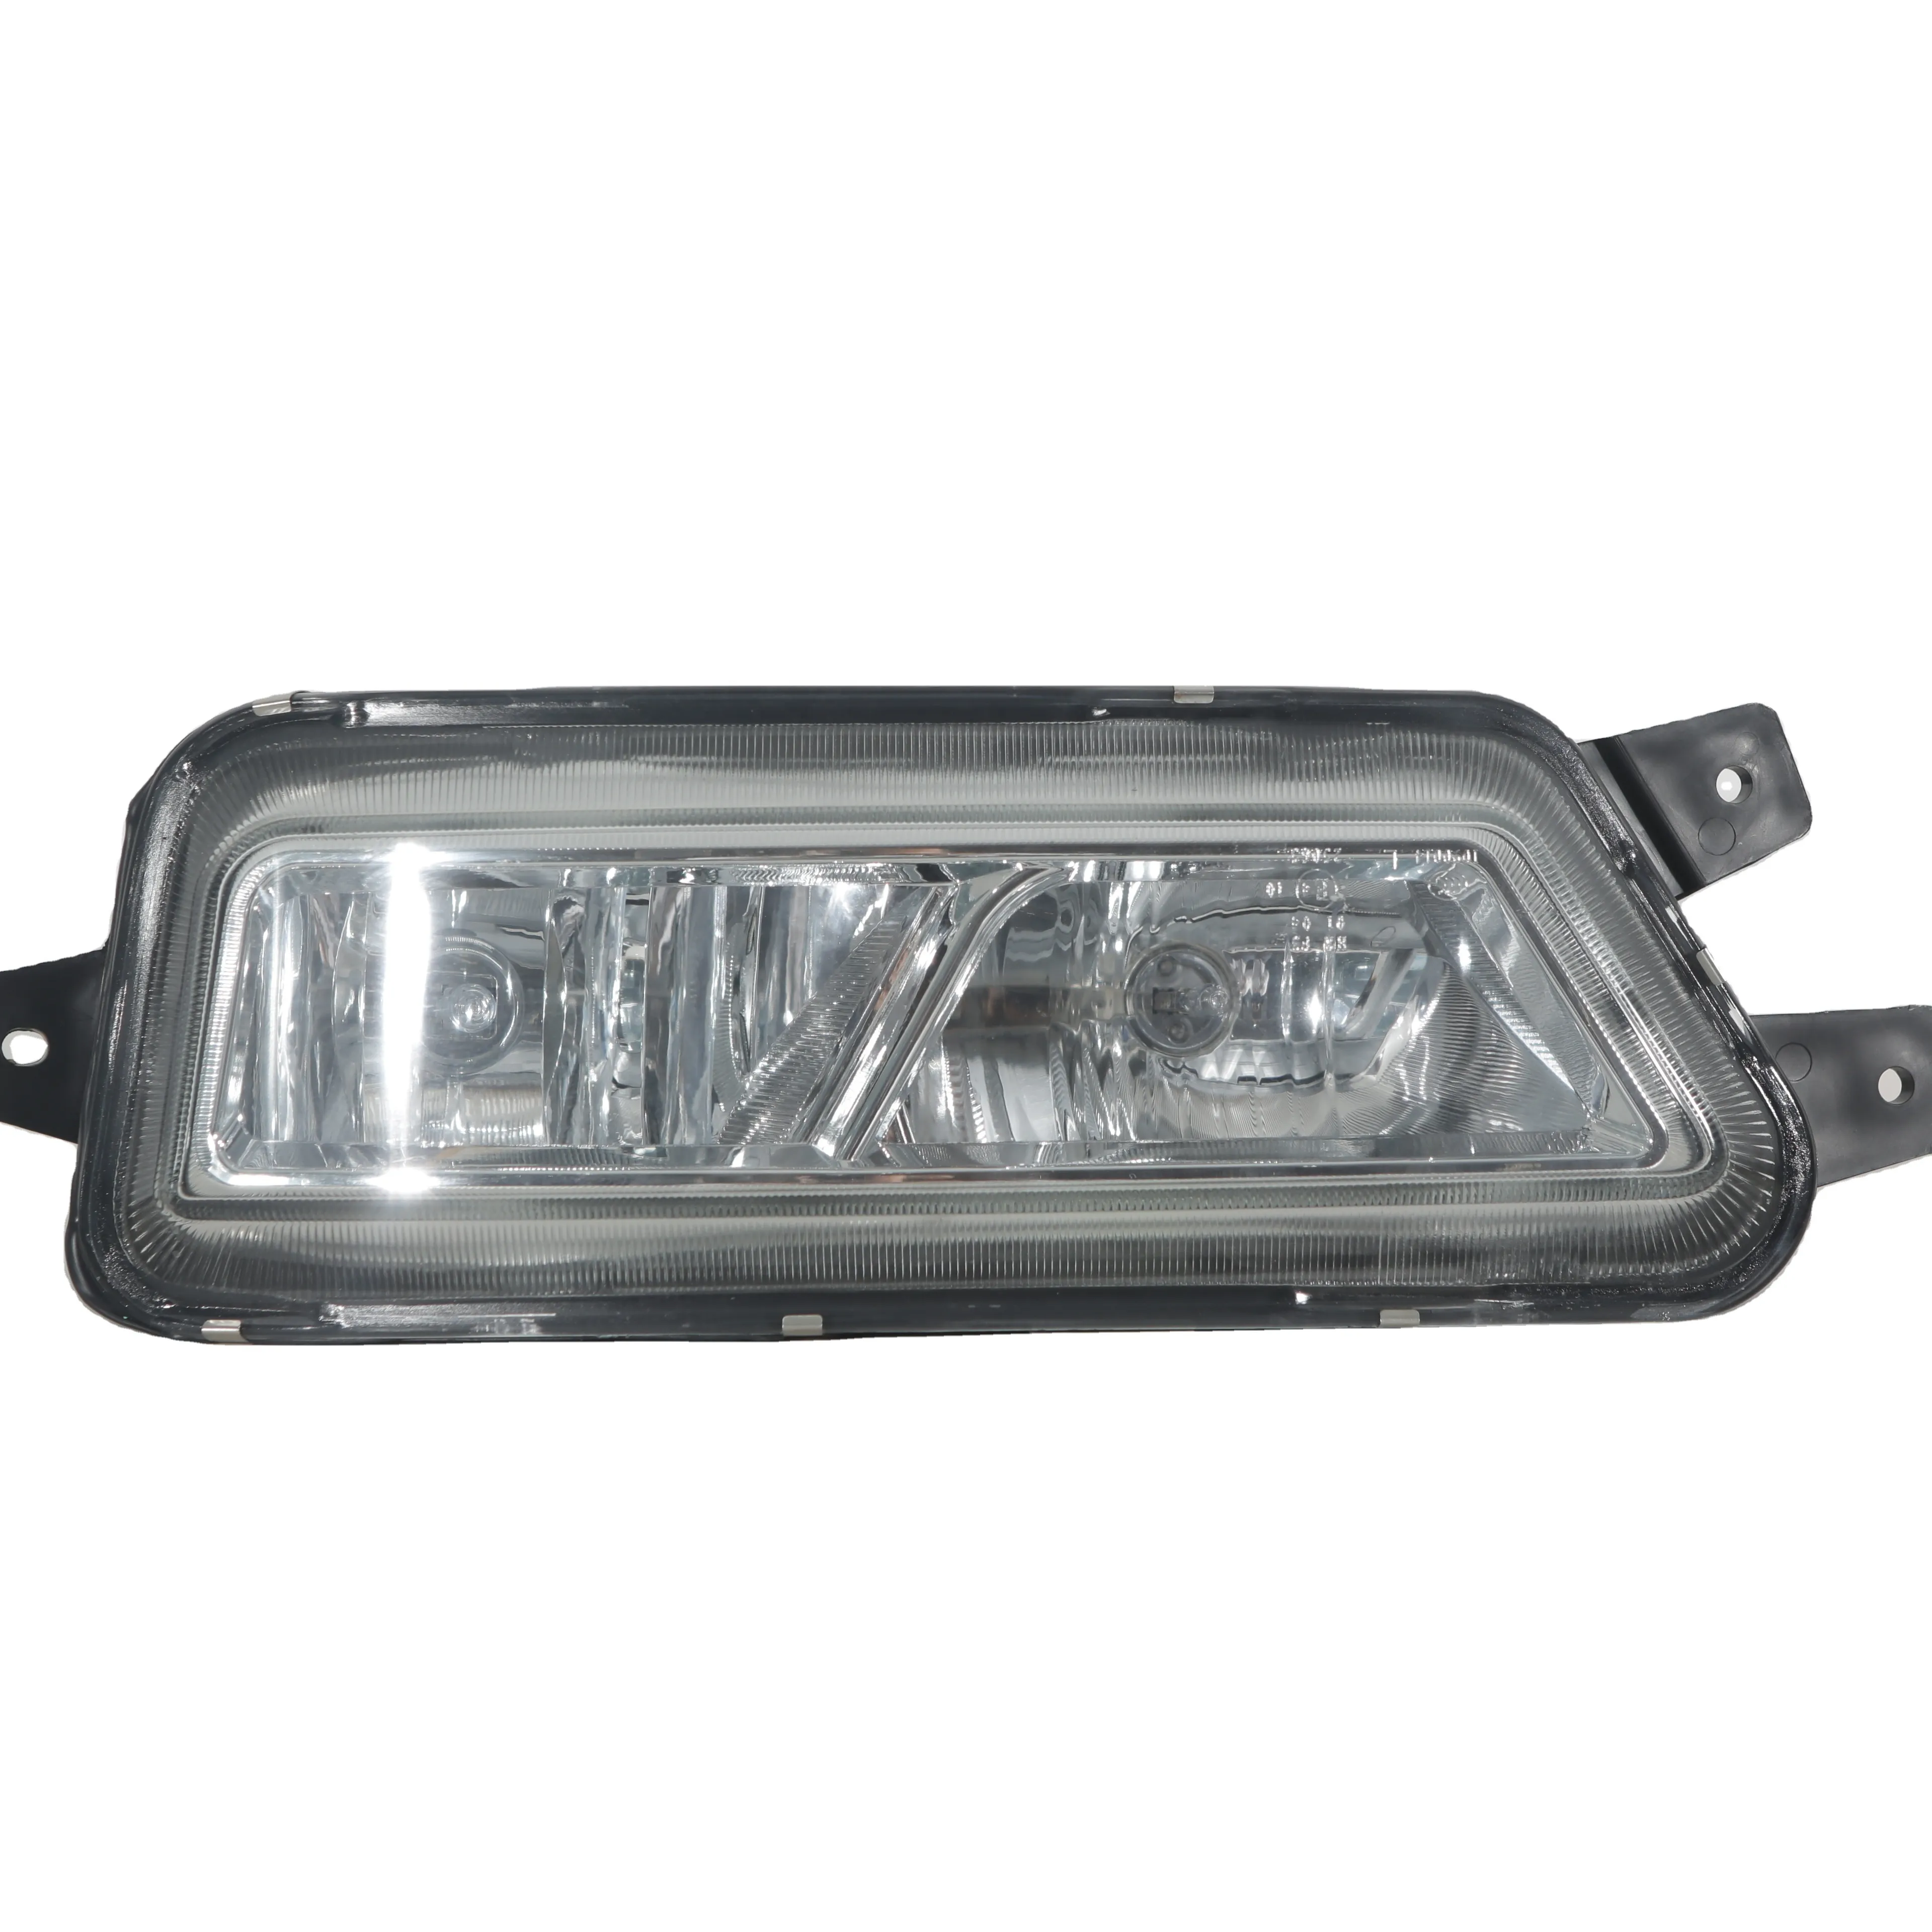 Ludebei Self-Produced JH6-1063 Front Fog Light for FAW Truck 41cm*91cm*21.6cm Dimensions Self-produced Driving Lights